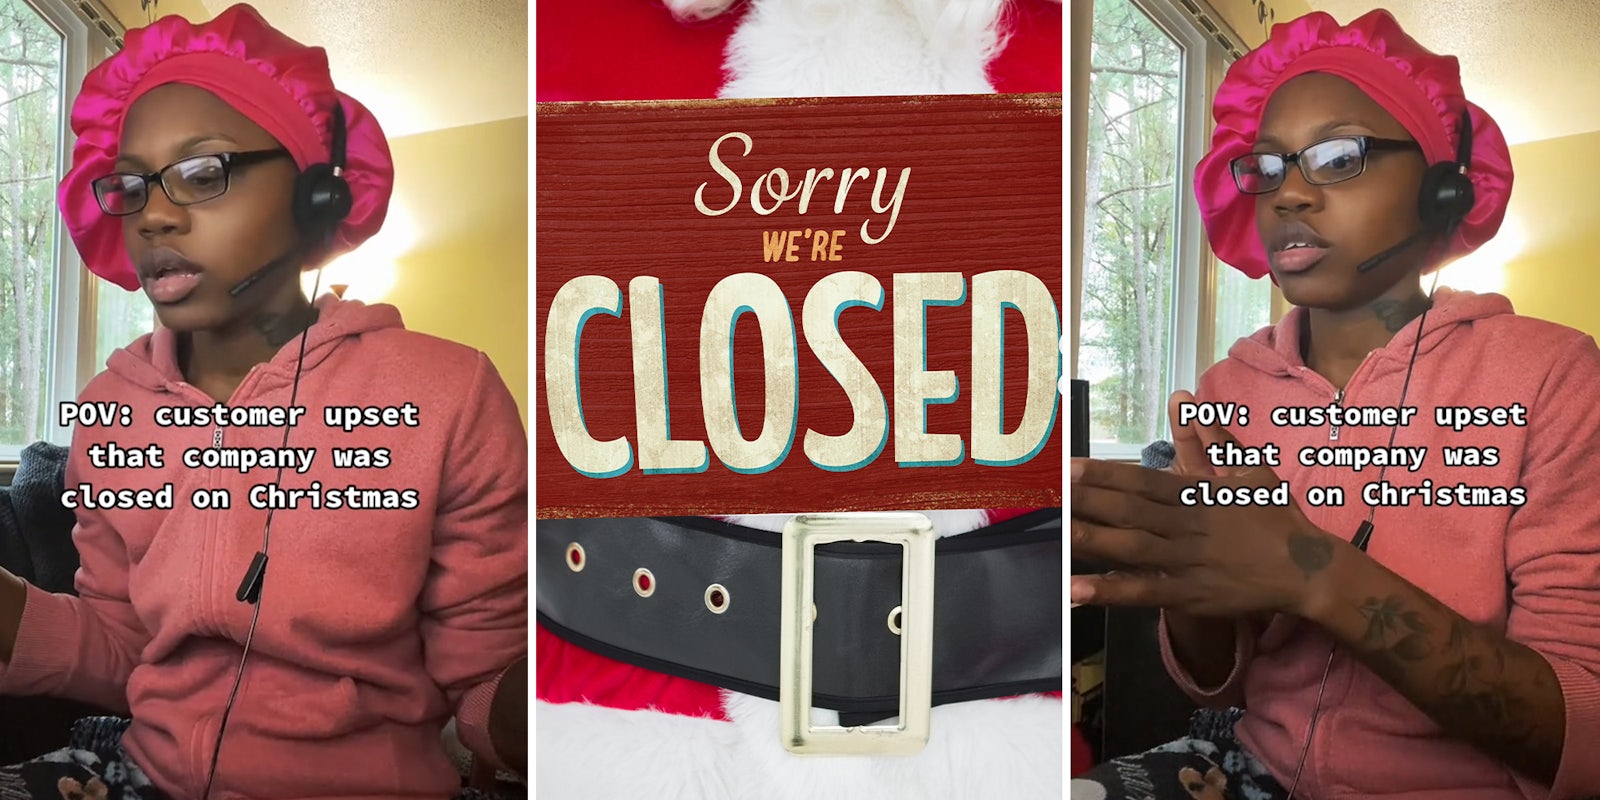 Customer service rep says customer was upset company was closed on Christmas